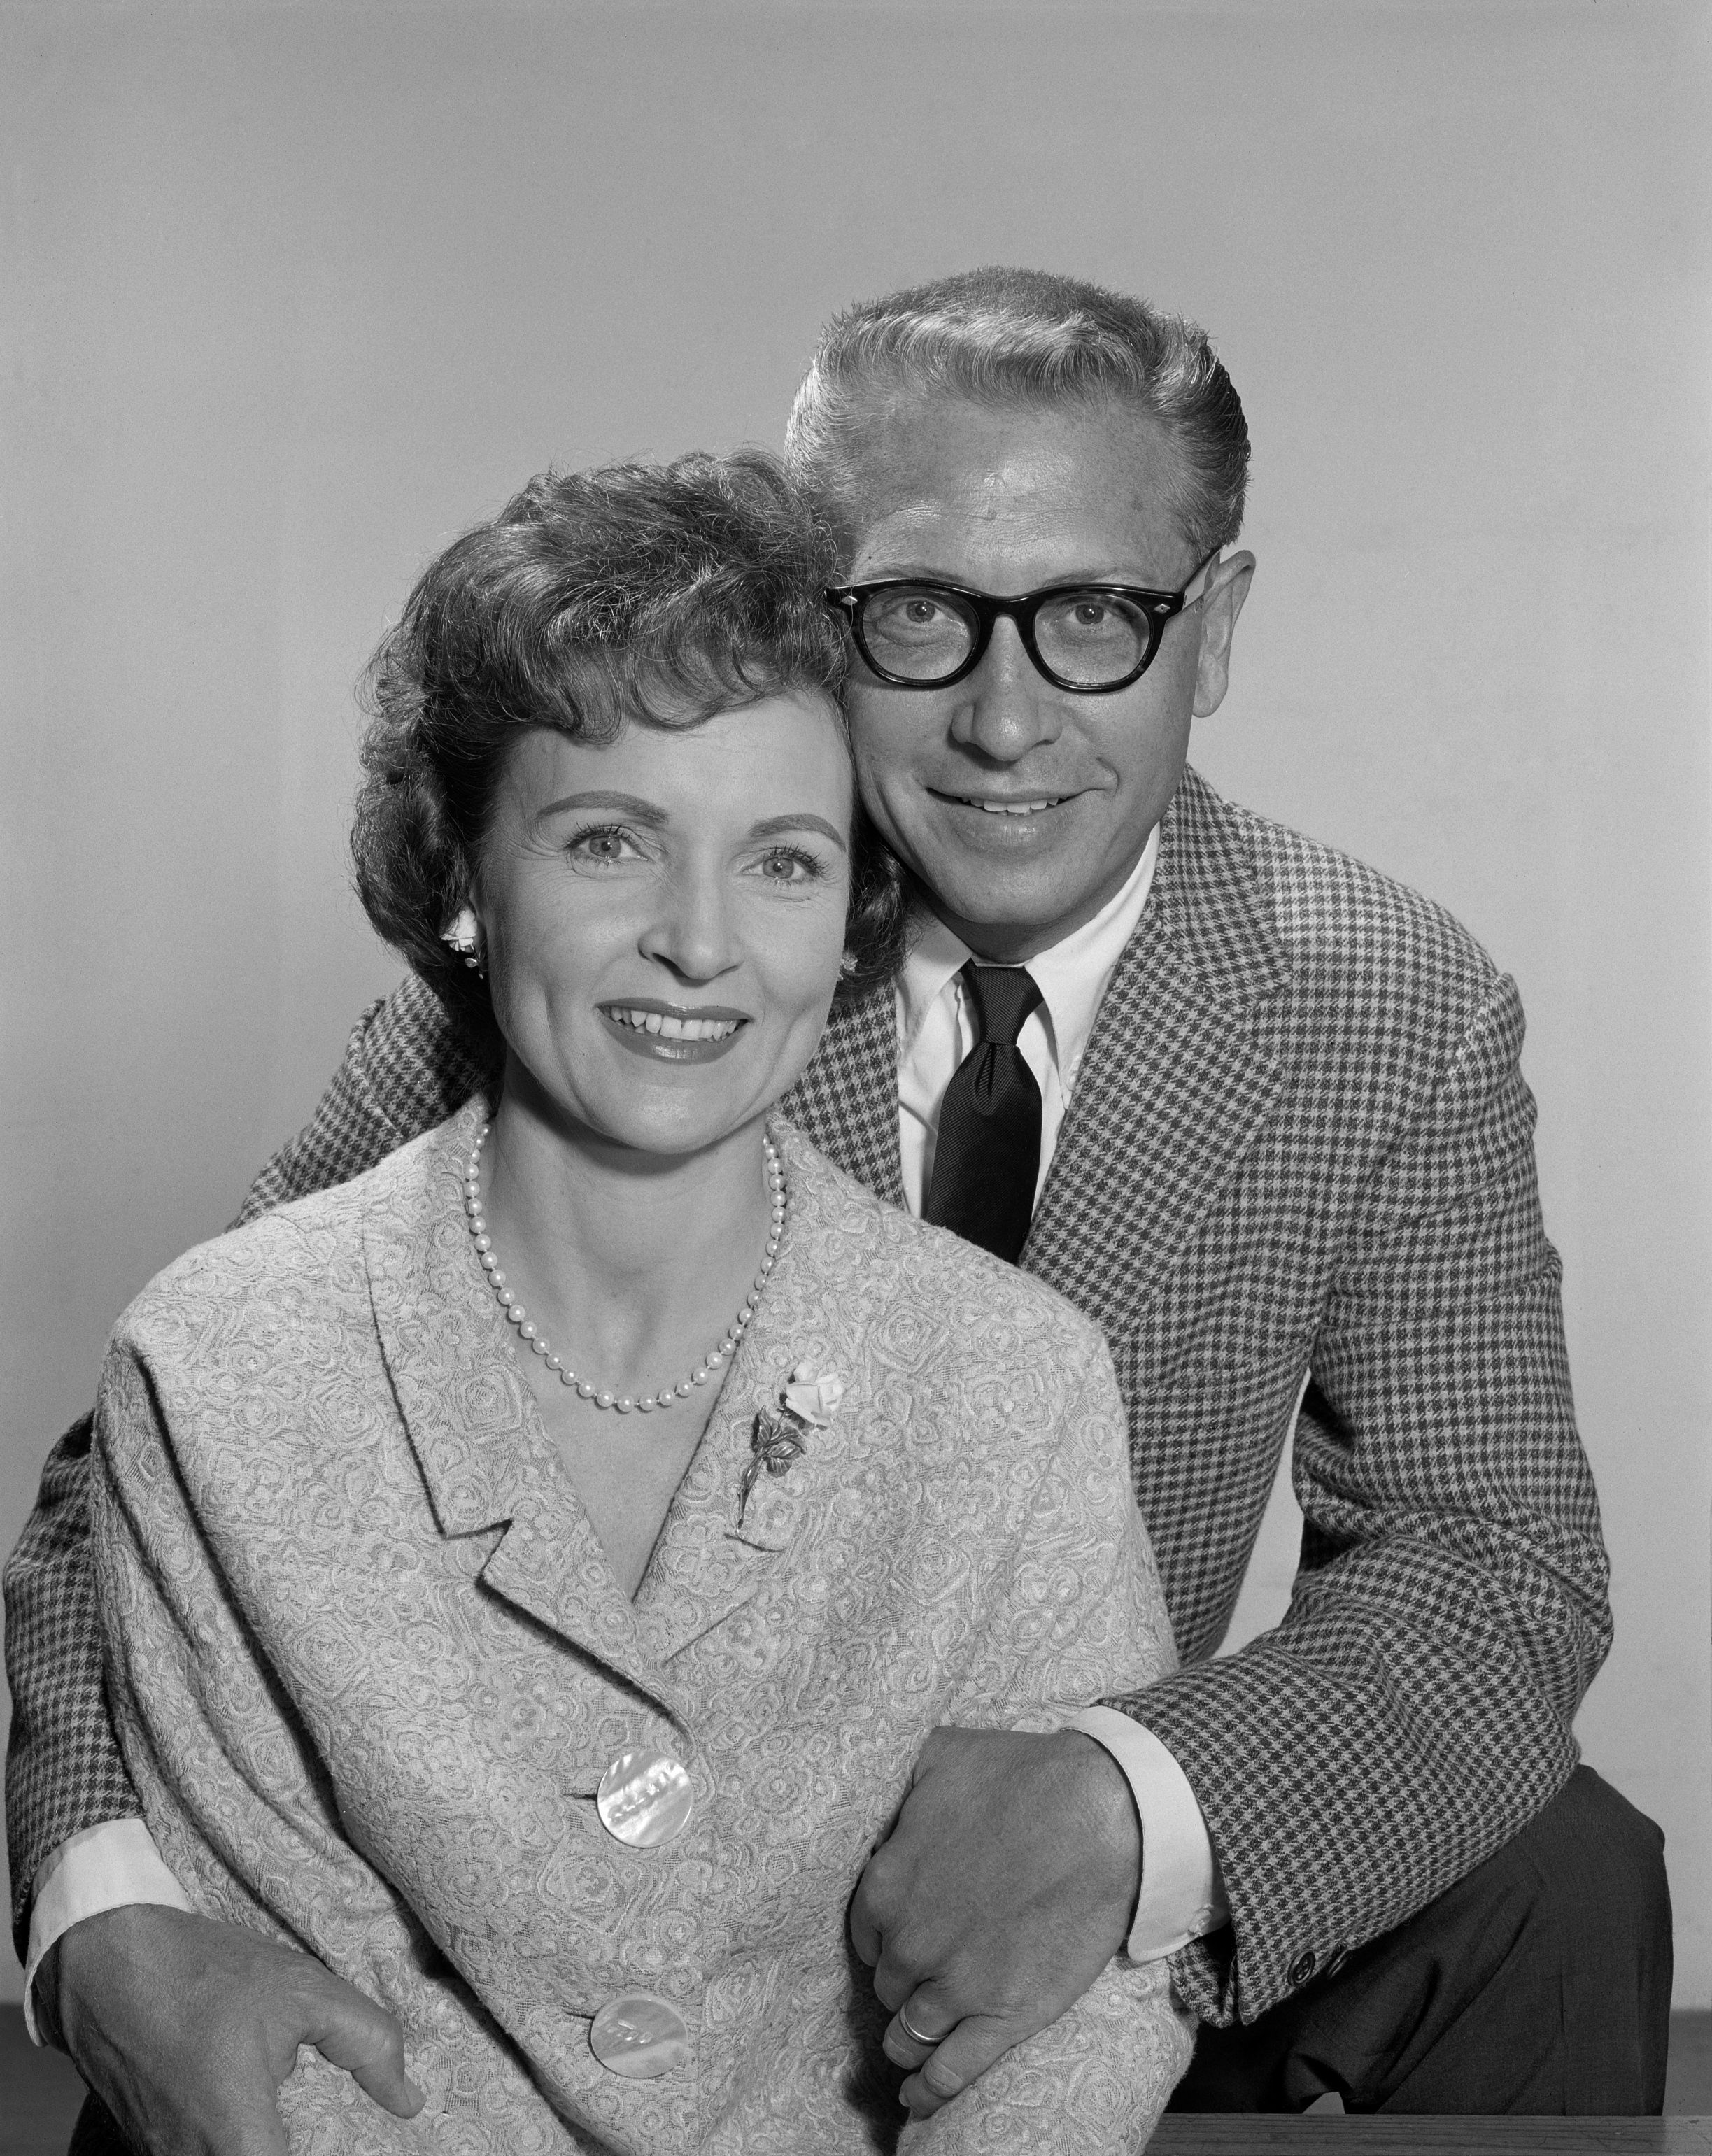 betty-white-and-allen-ludden-for-password-image-dated-june-news-photo-106670843-1546282930